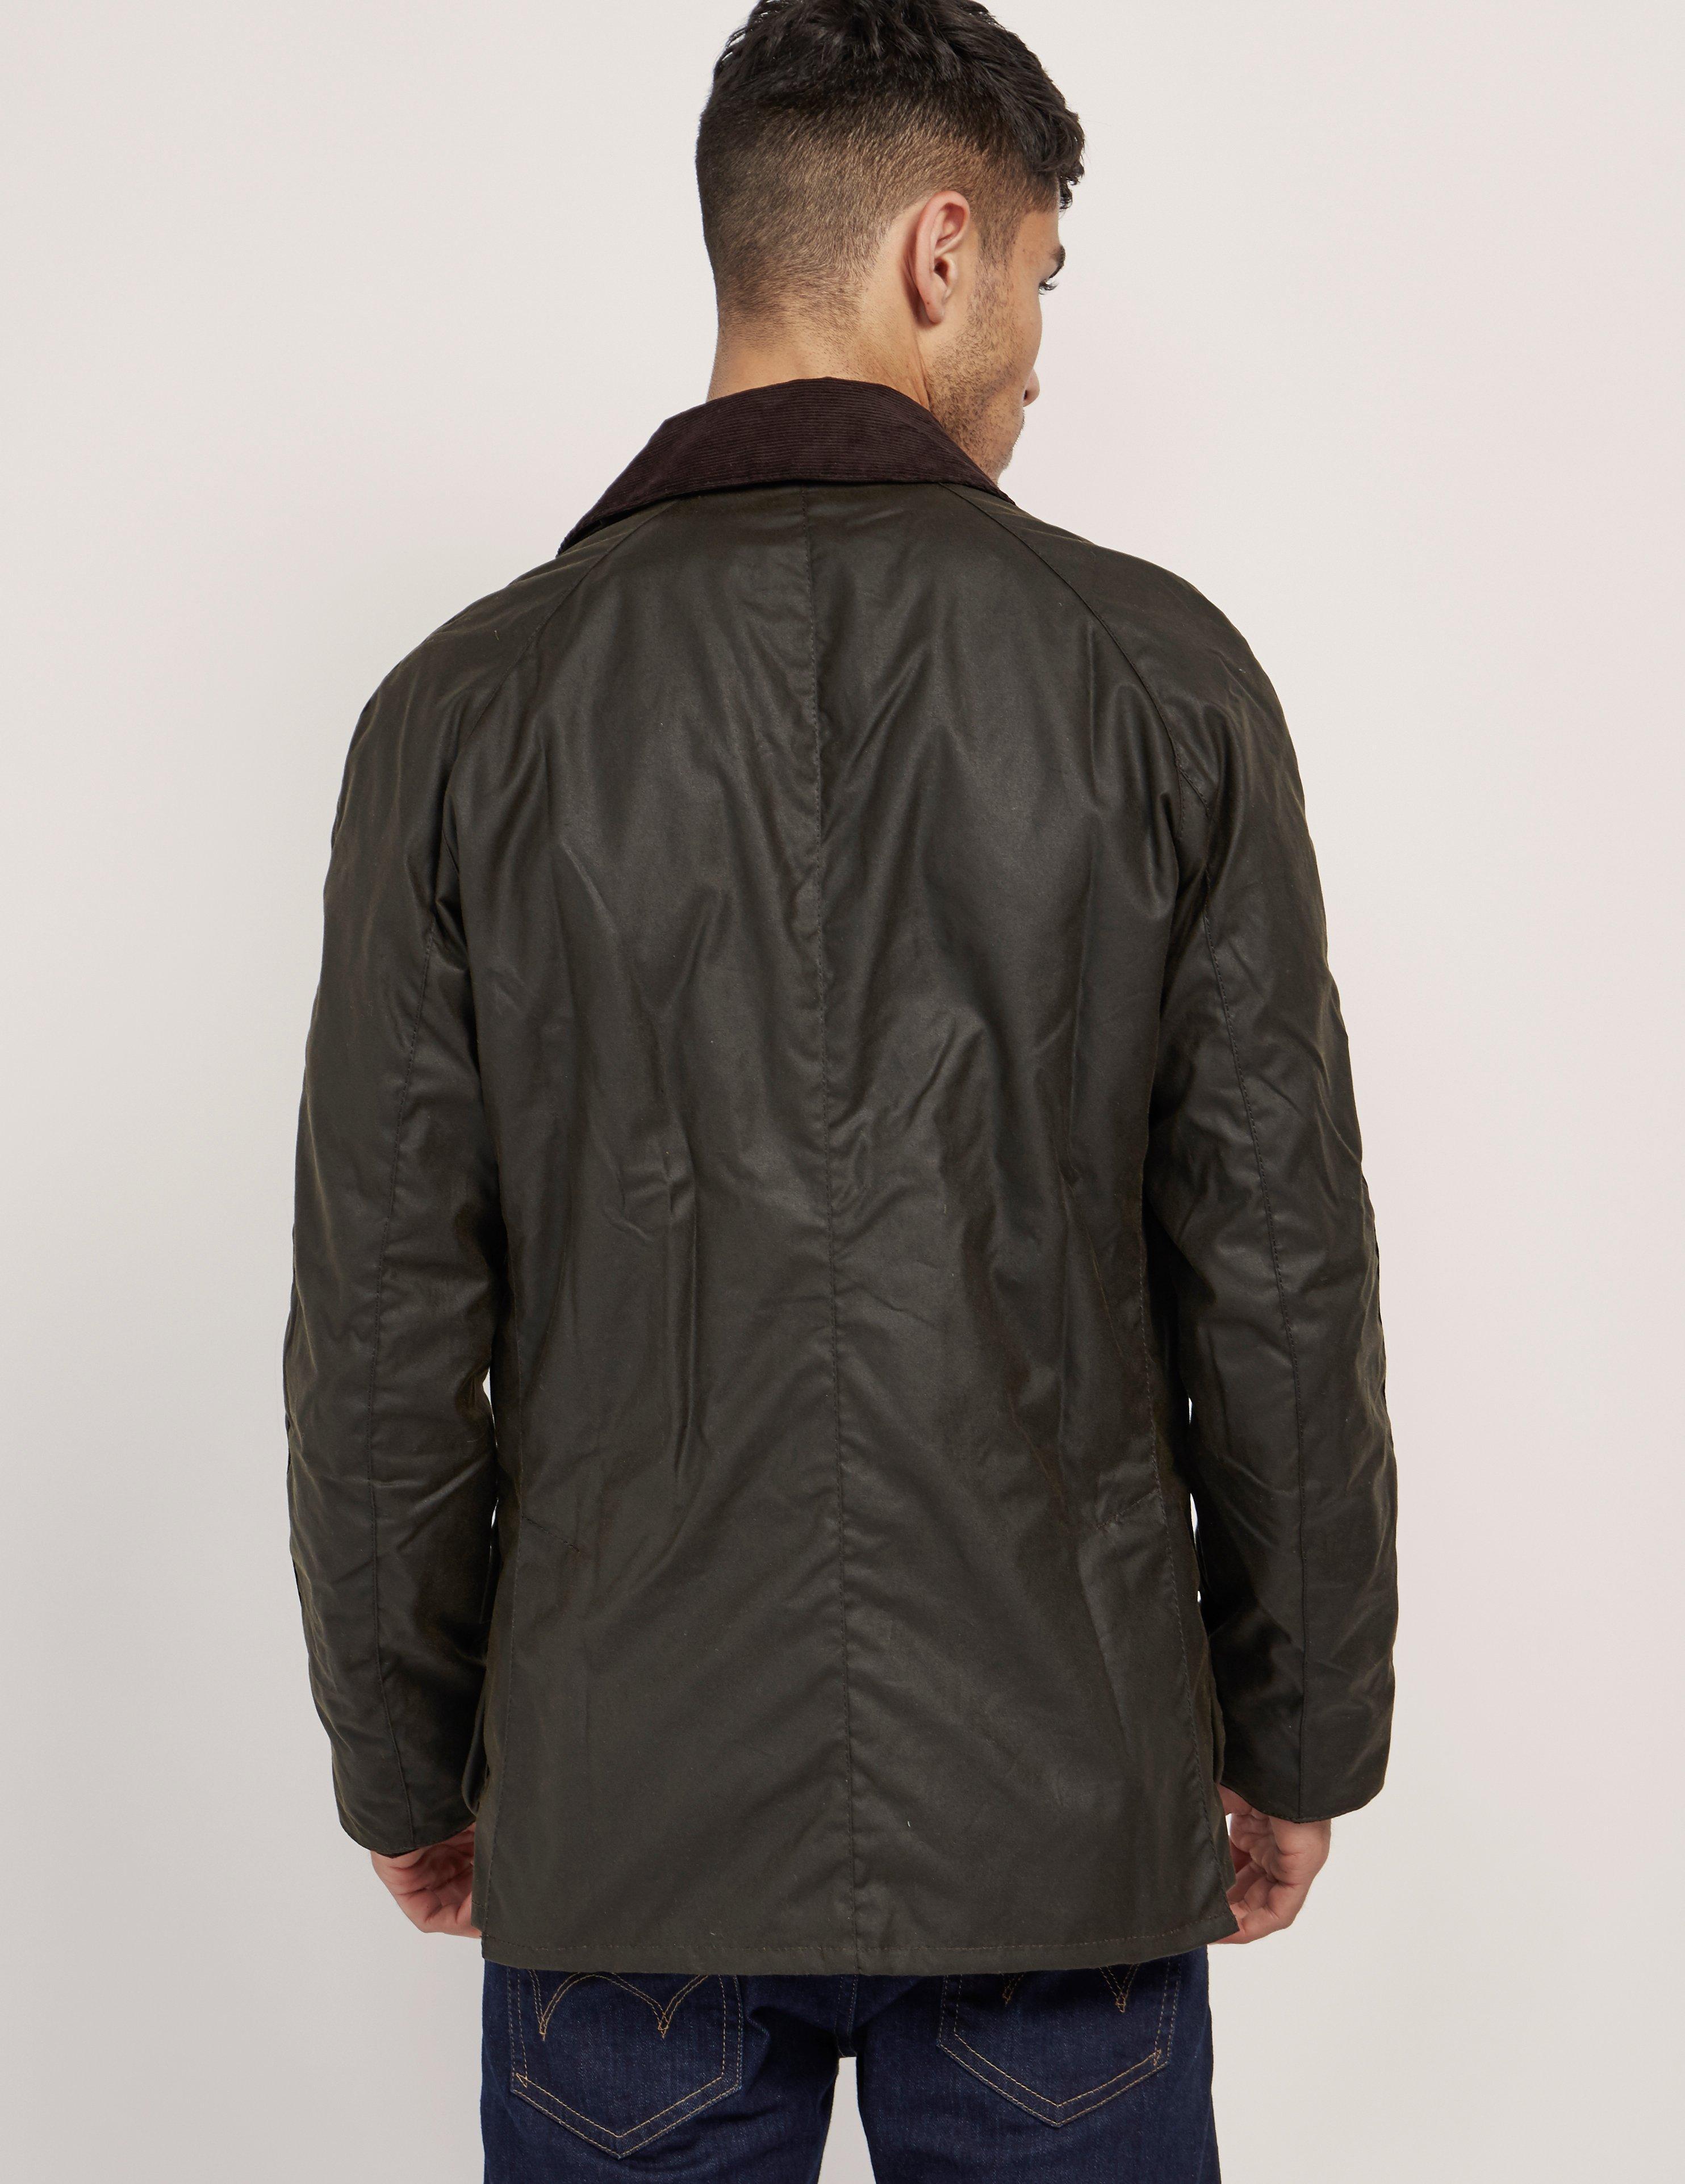 Barbour Cotton Ashby Jacket in Brown for Men - Lyst